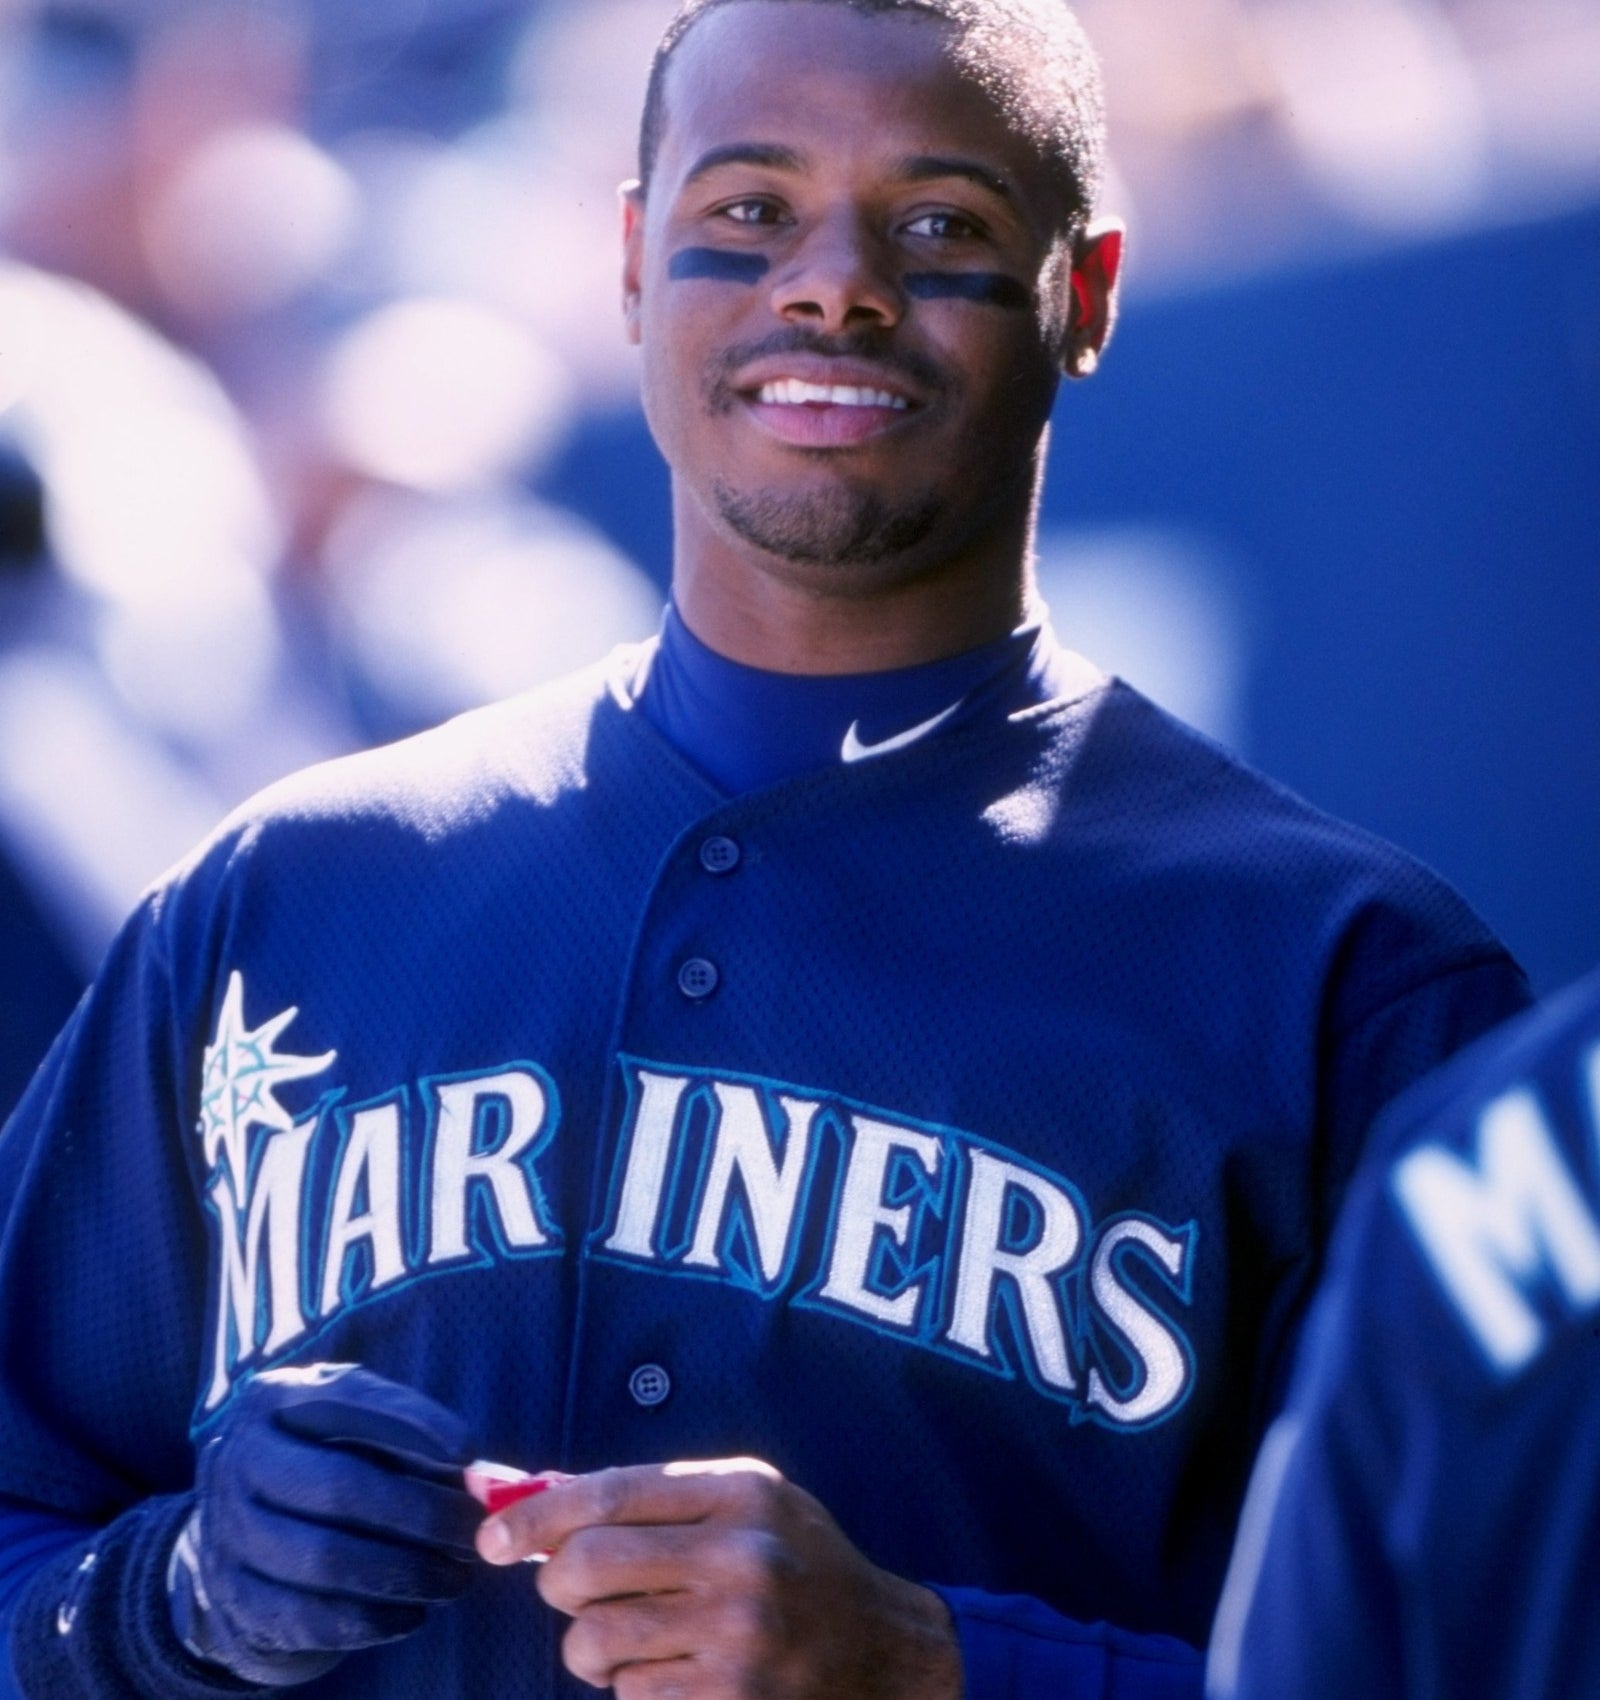 My Childhood Crush Ken Griffey Jr Is A Dad And Now I Have A Crush On His Son